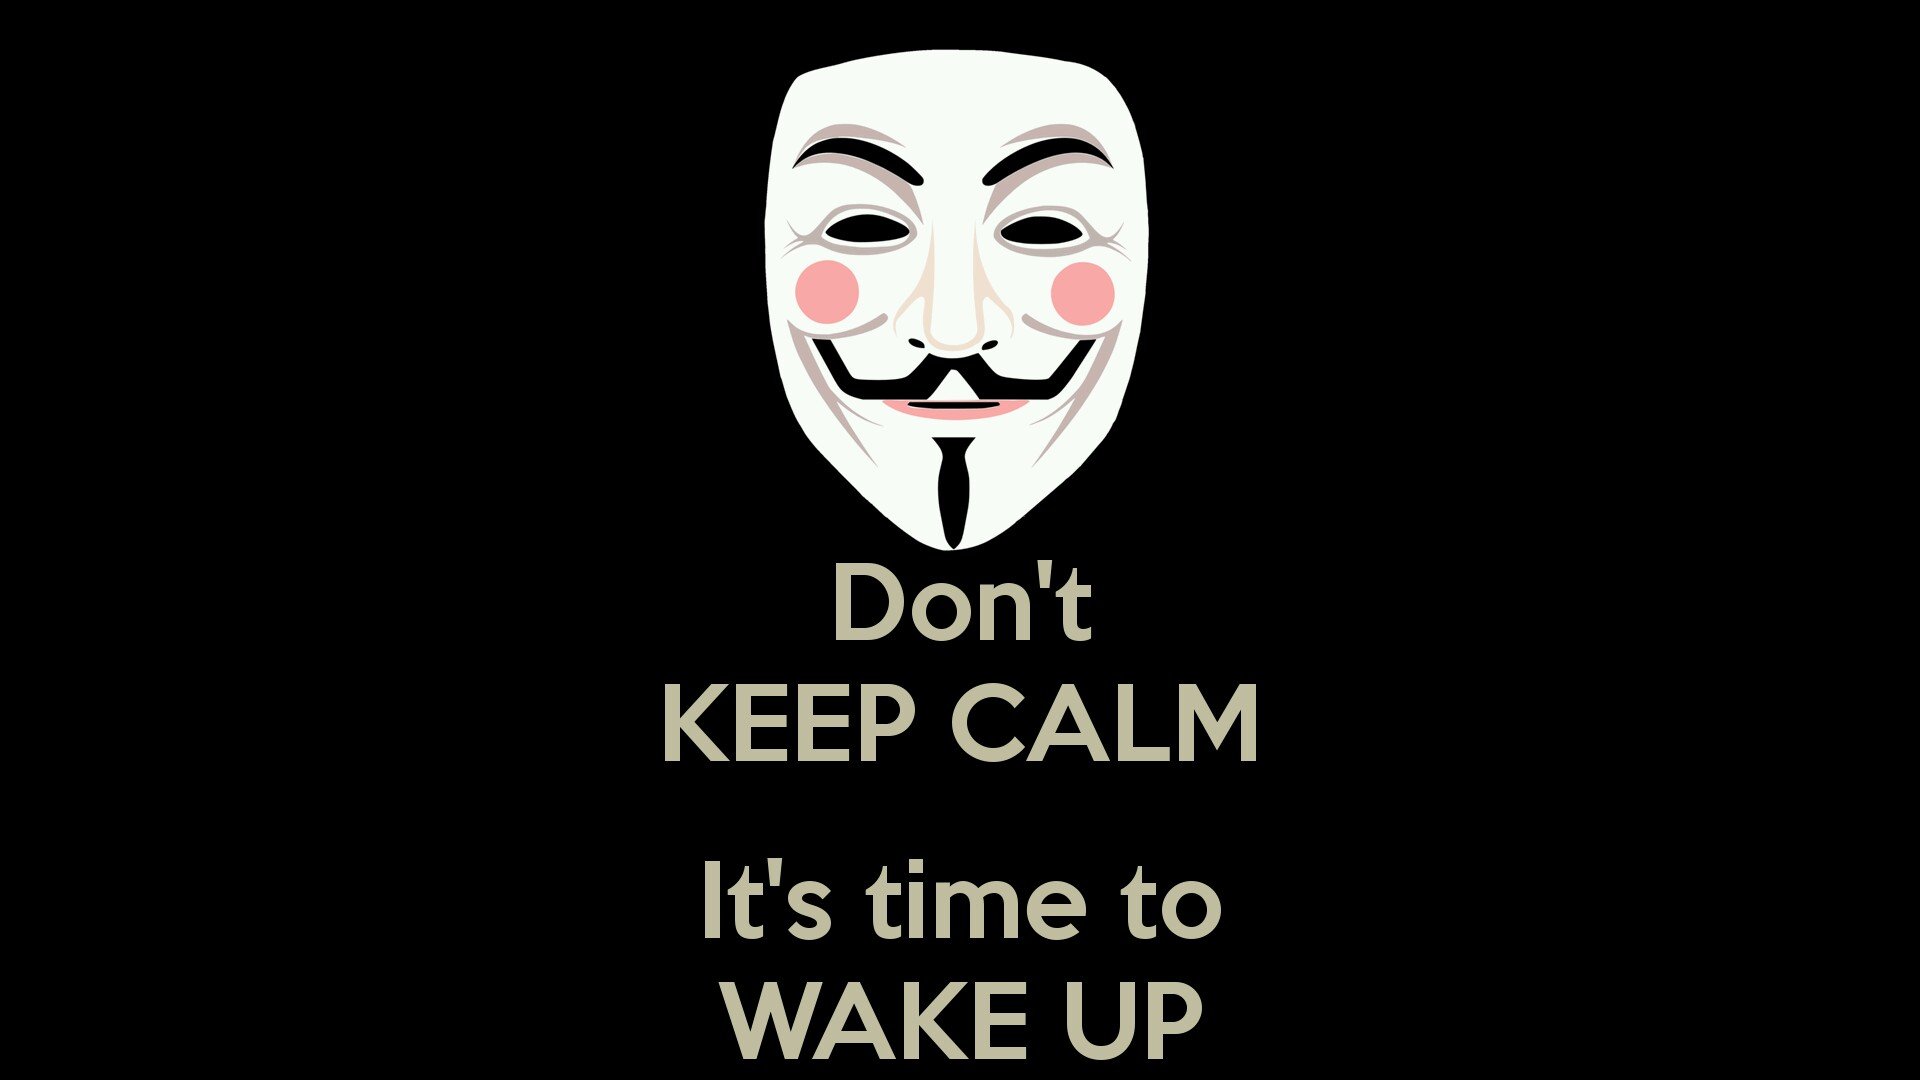 Some are blind some notice but don't tell and others wake up make sure your the one who wakes up